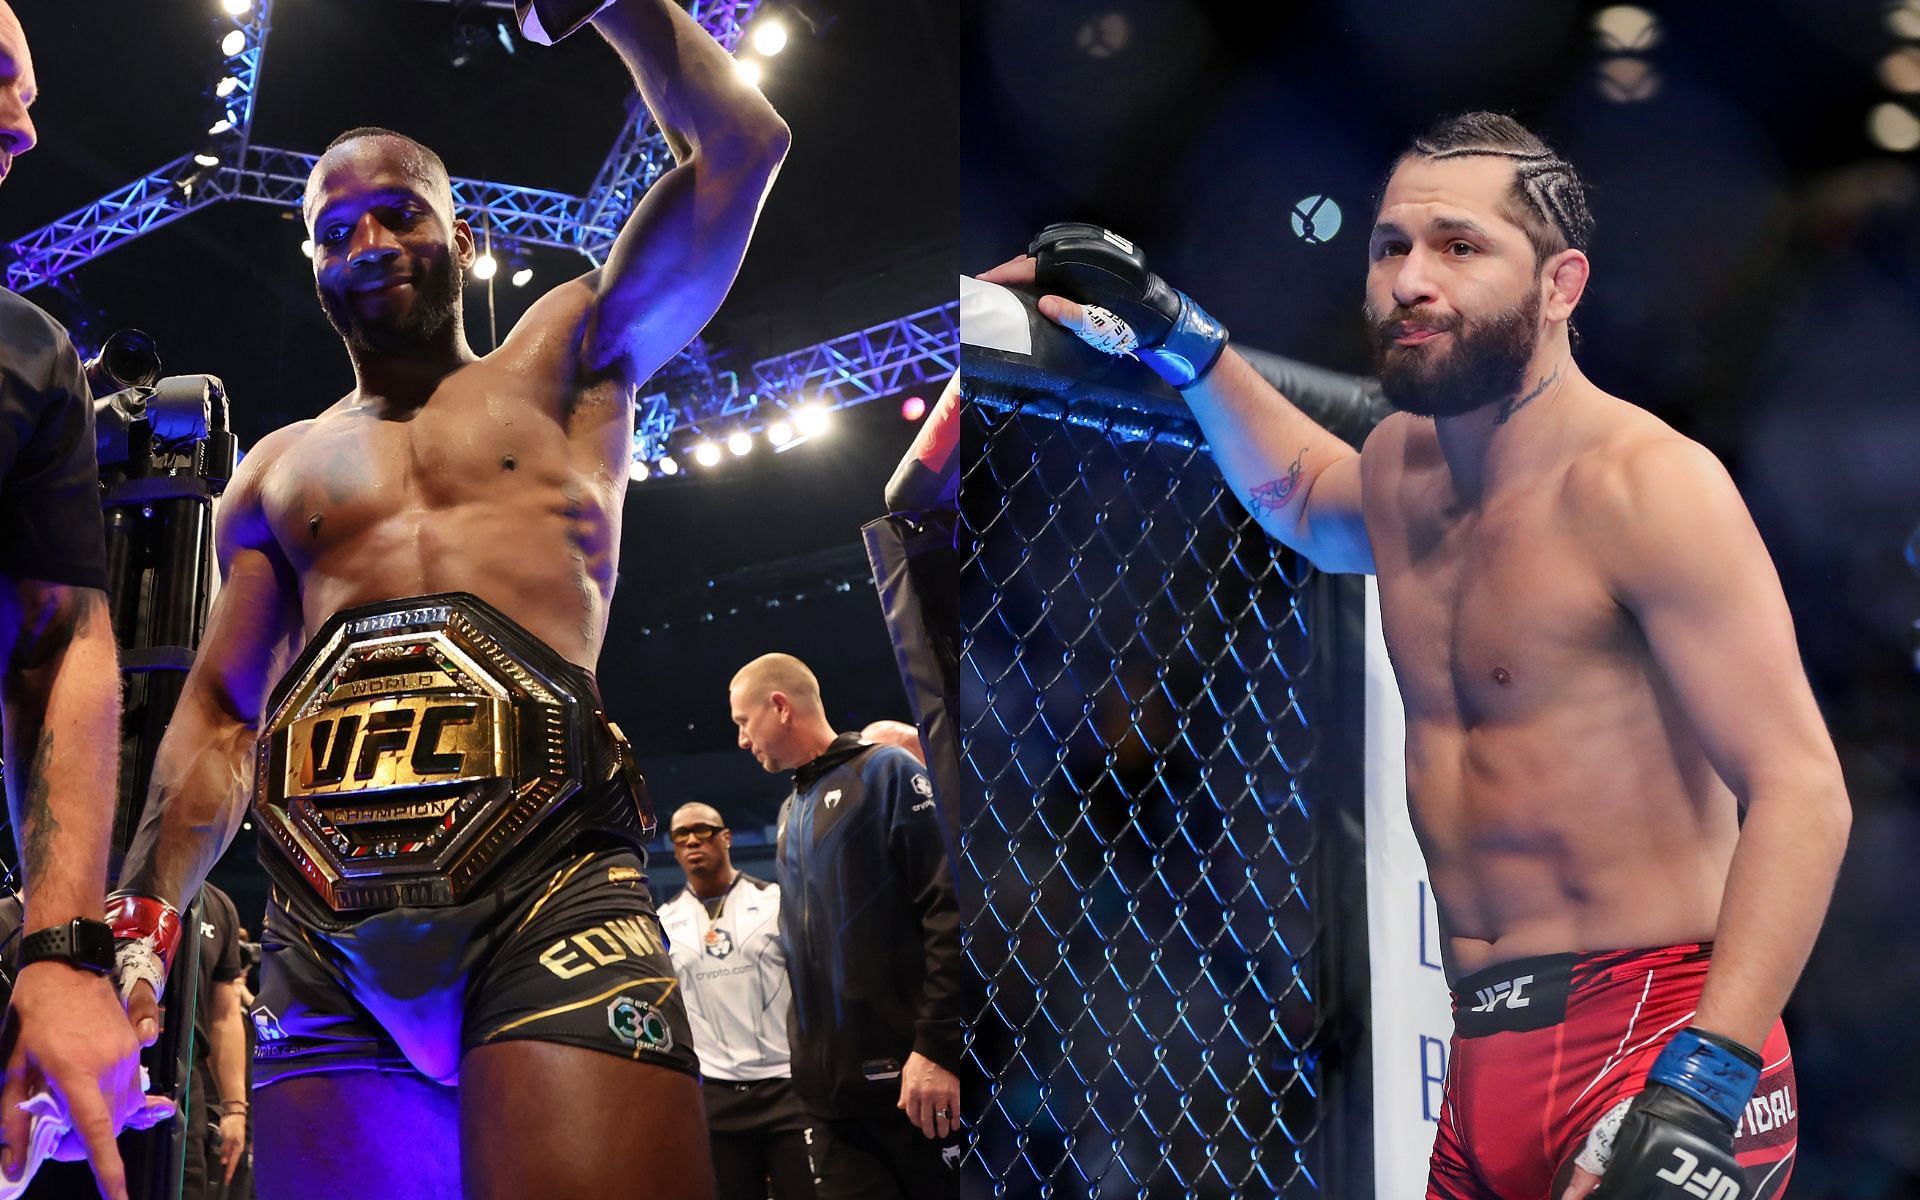 Leon Edwards (left) and Jorge Masvidal (right) (Image credits Getty Images)